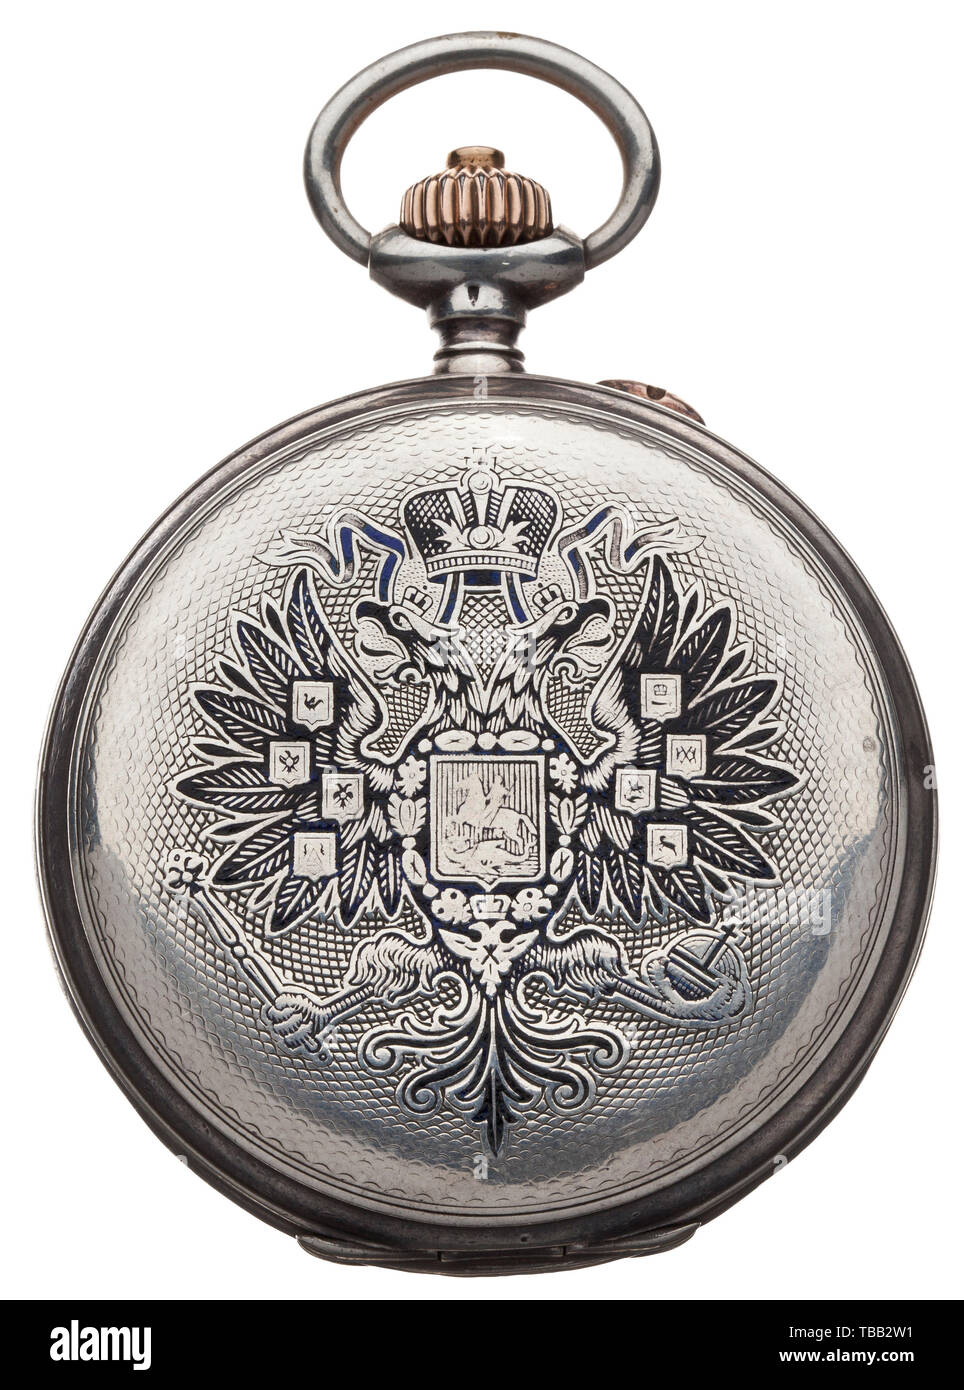 Nicholas Ii Of Russia A Silver Gift Watch Hunter Case Gift Savonette Of 875 84 Zolotniki Silver Made By Pavel Bure Watch Maker For The Imperial Russian Court The Lid With